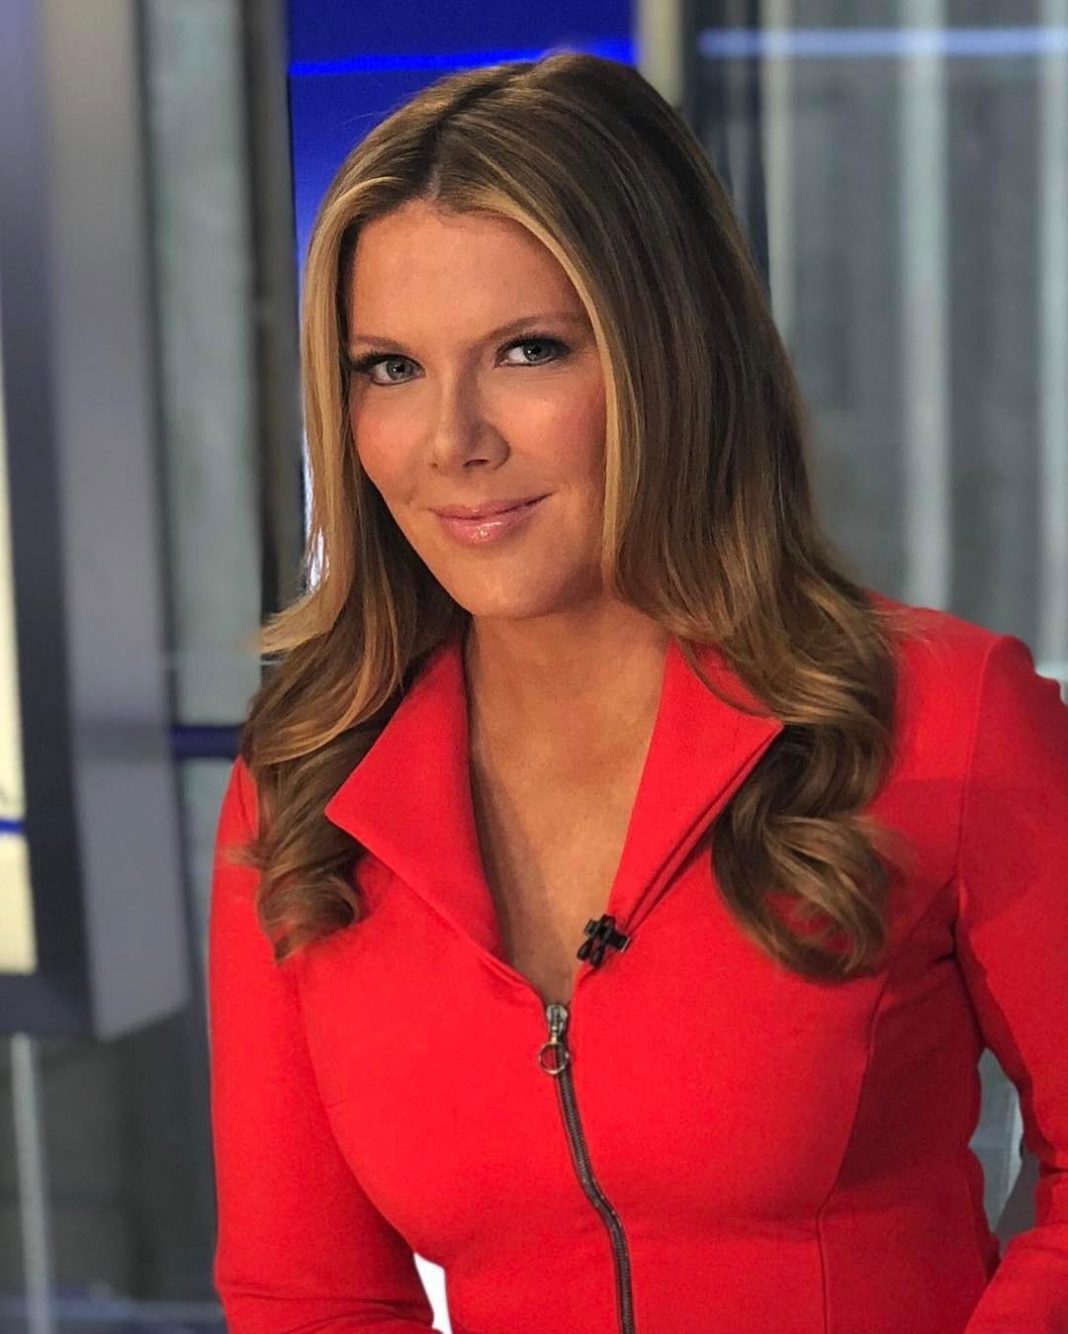 32 Trish Regan Nude Pictures Which Are Sure To Keep You Charmed With Her Charisma 22